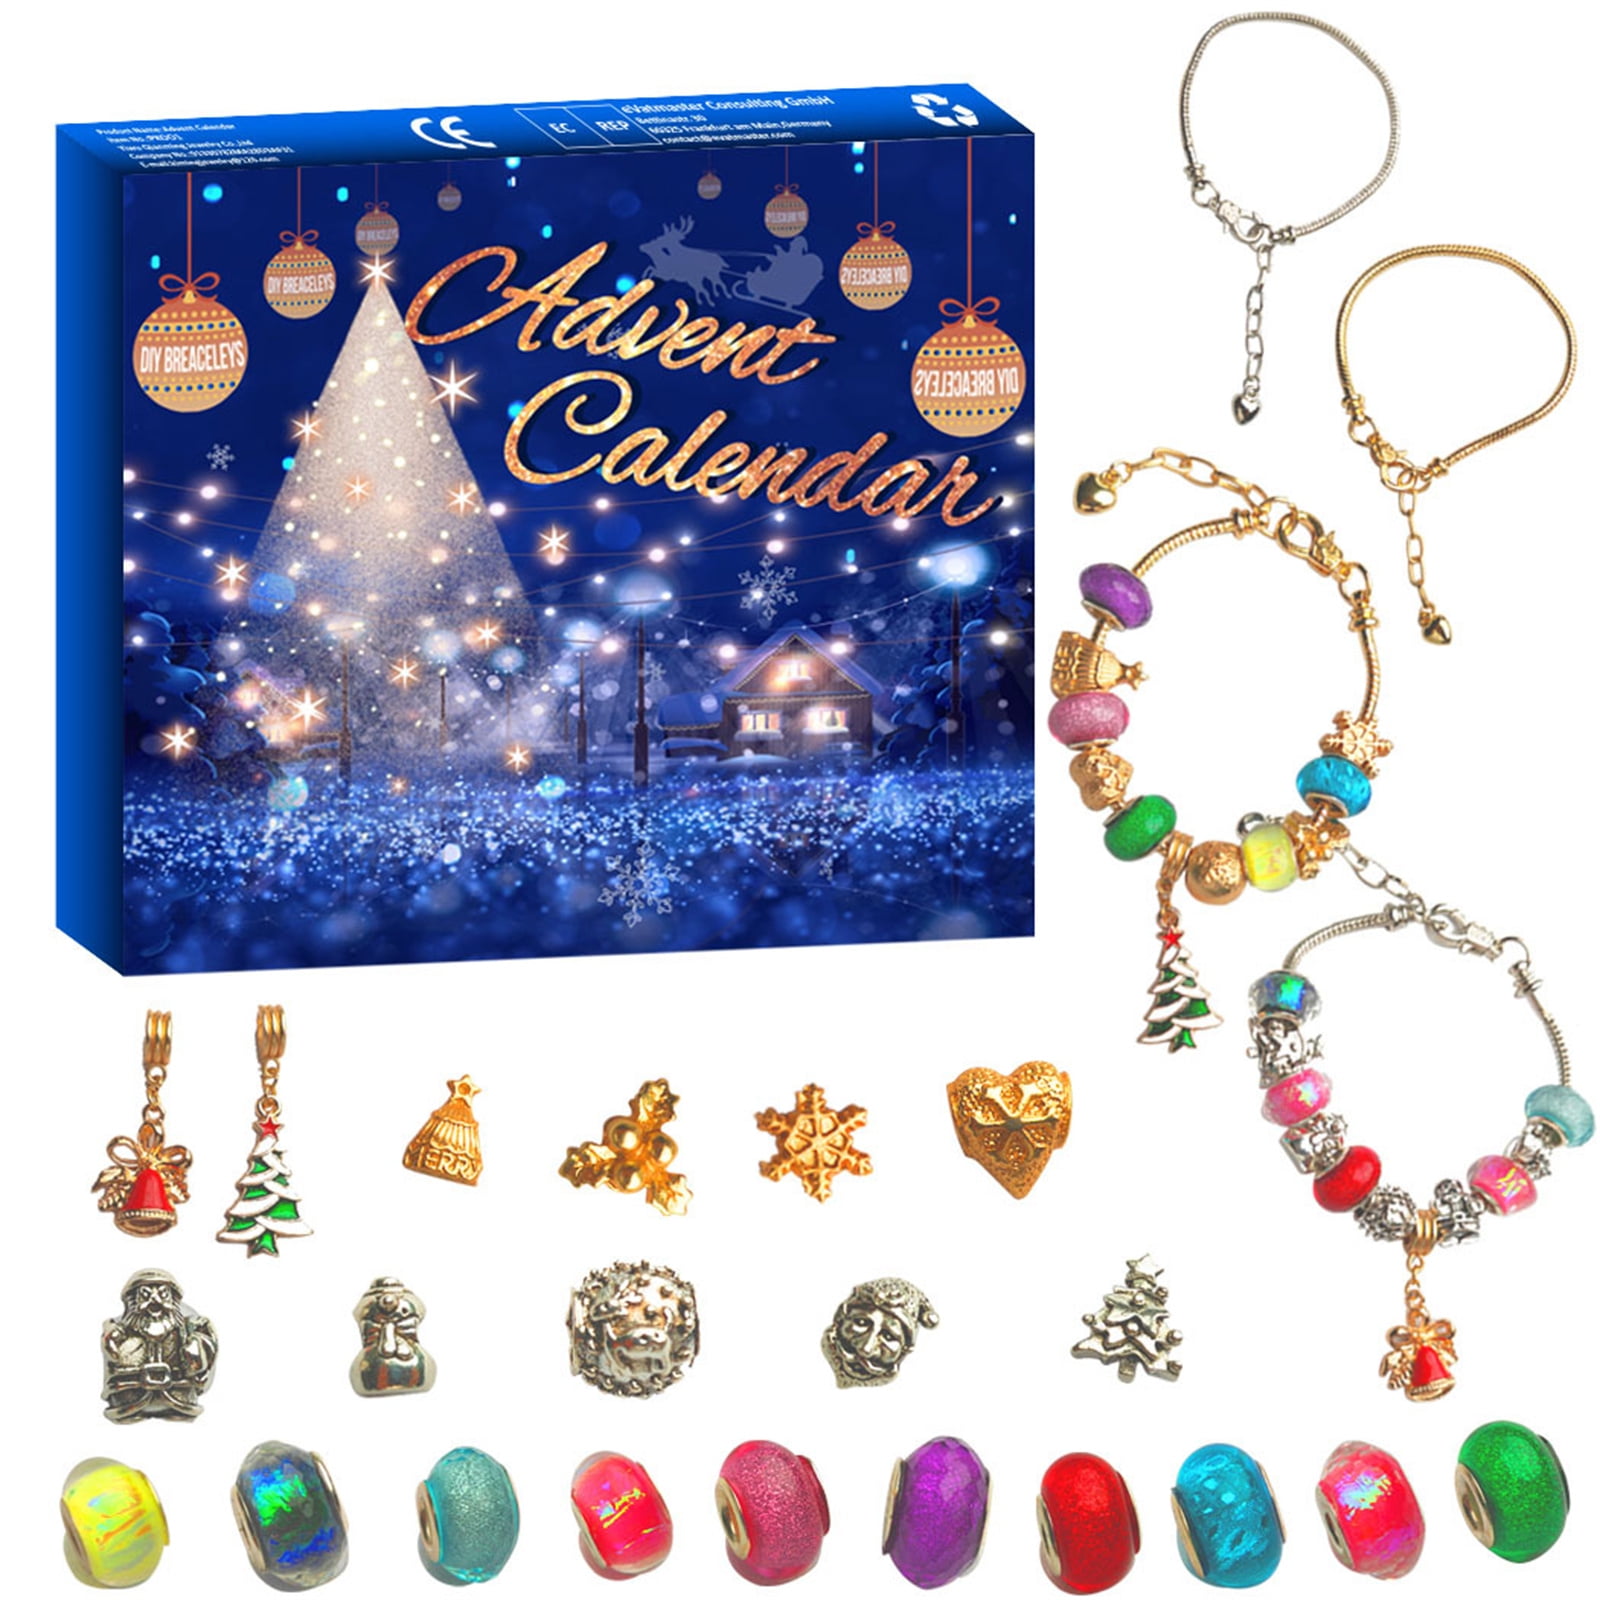 Build A Bracelet Jewelry Advent Calendar - Best for Ages 6 to 9